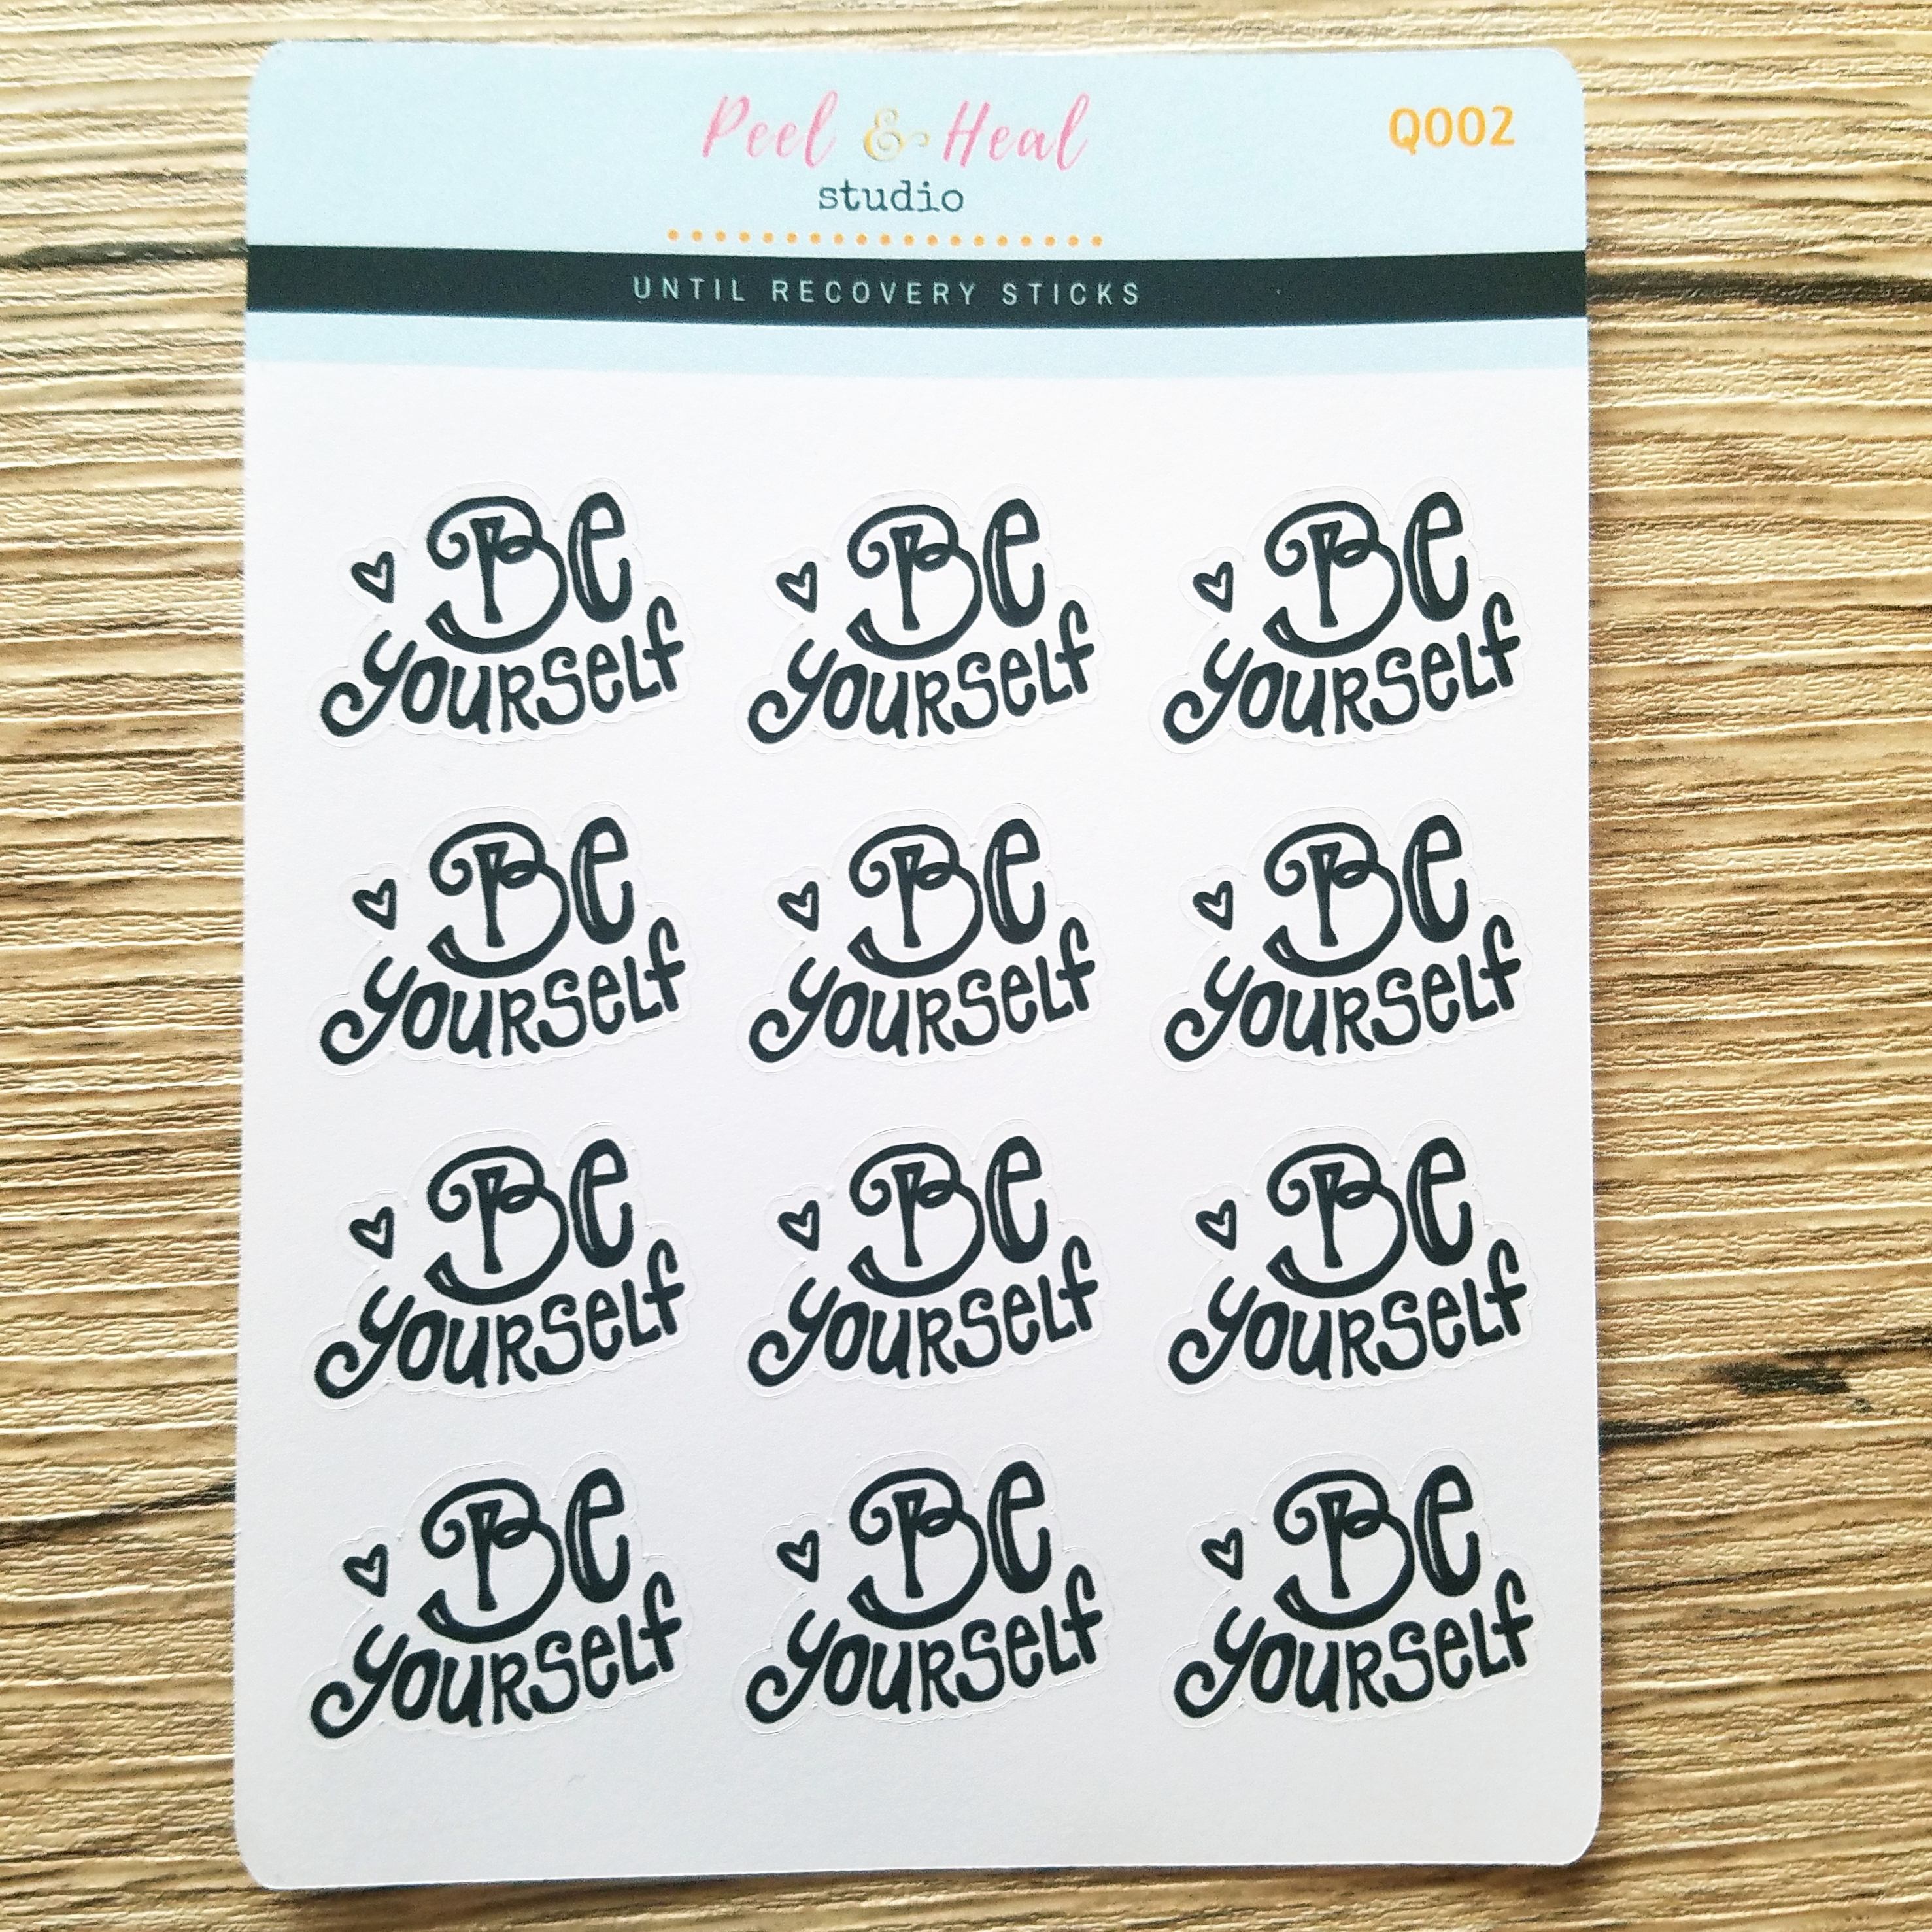 Be Yourself hand-lettered planner stickers - Peel & Heal Studio